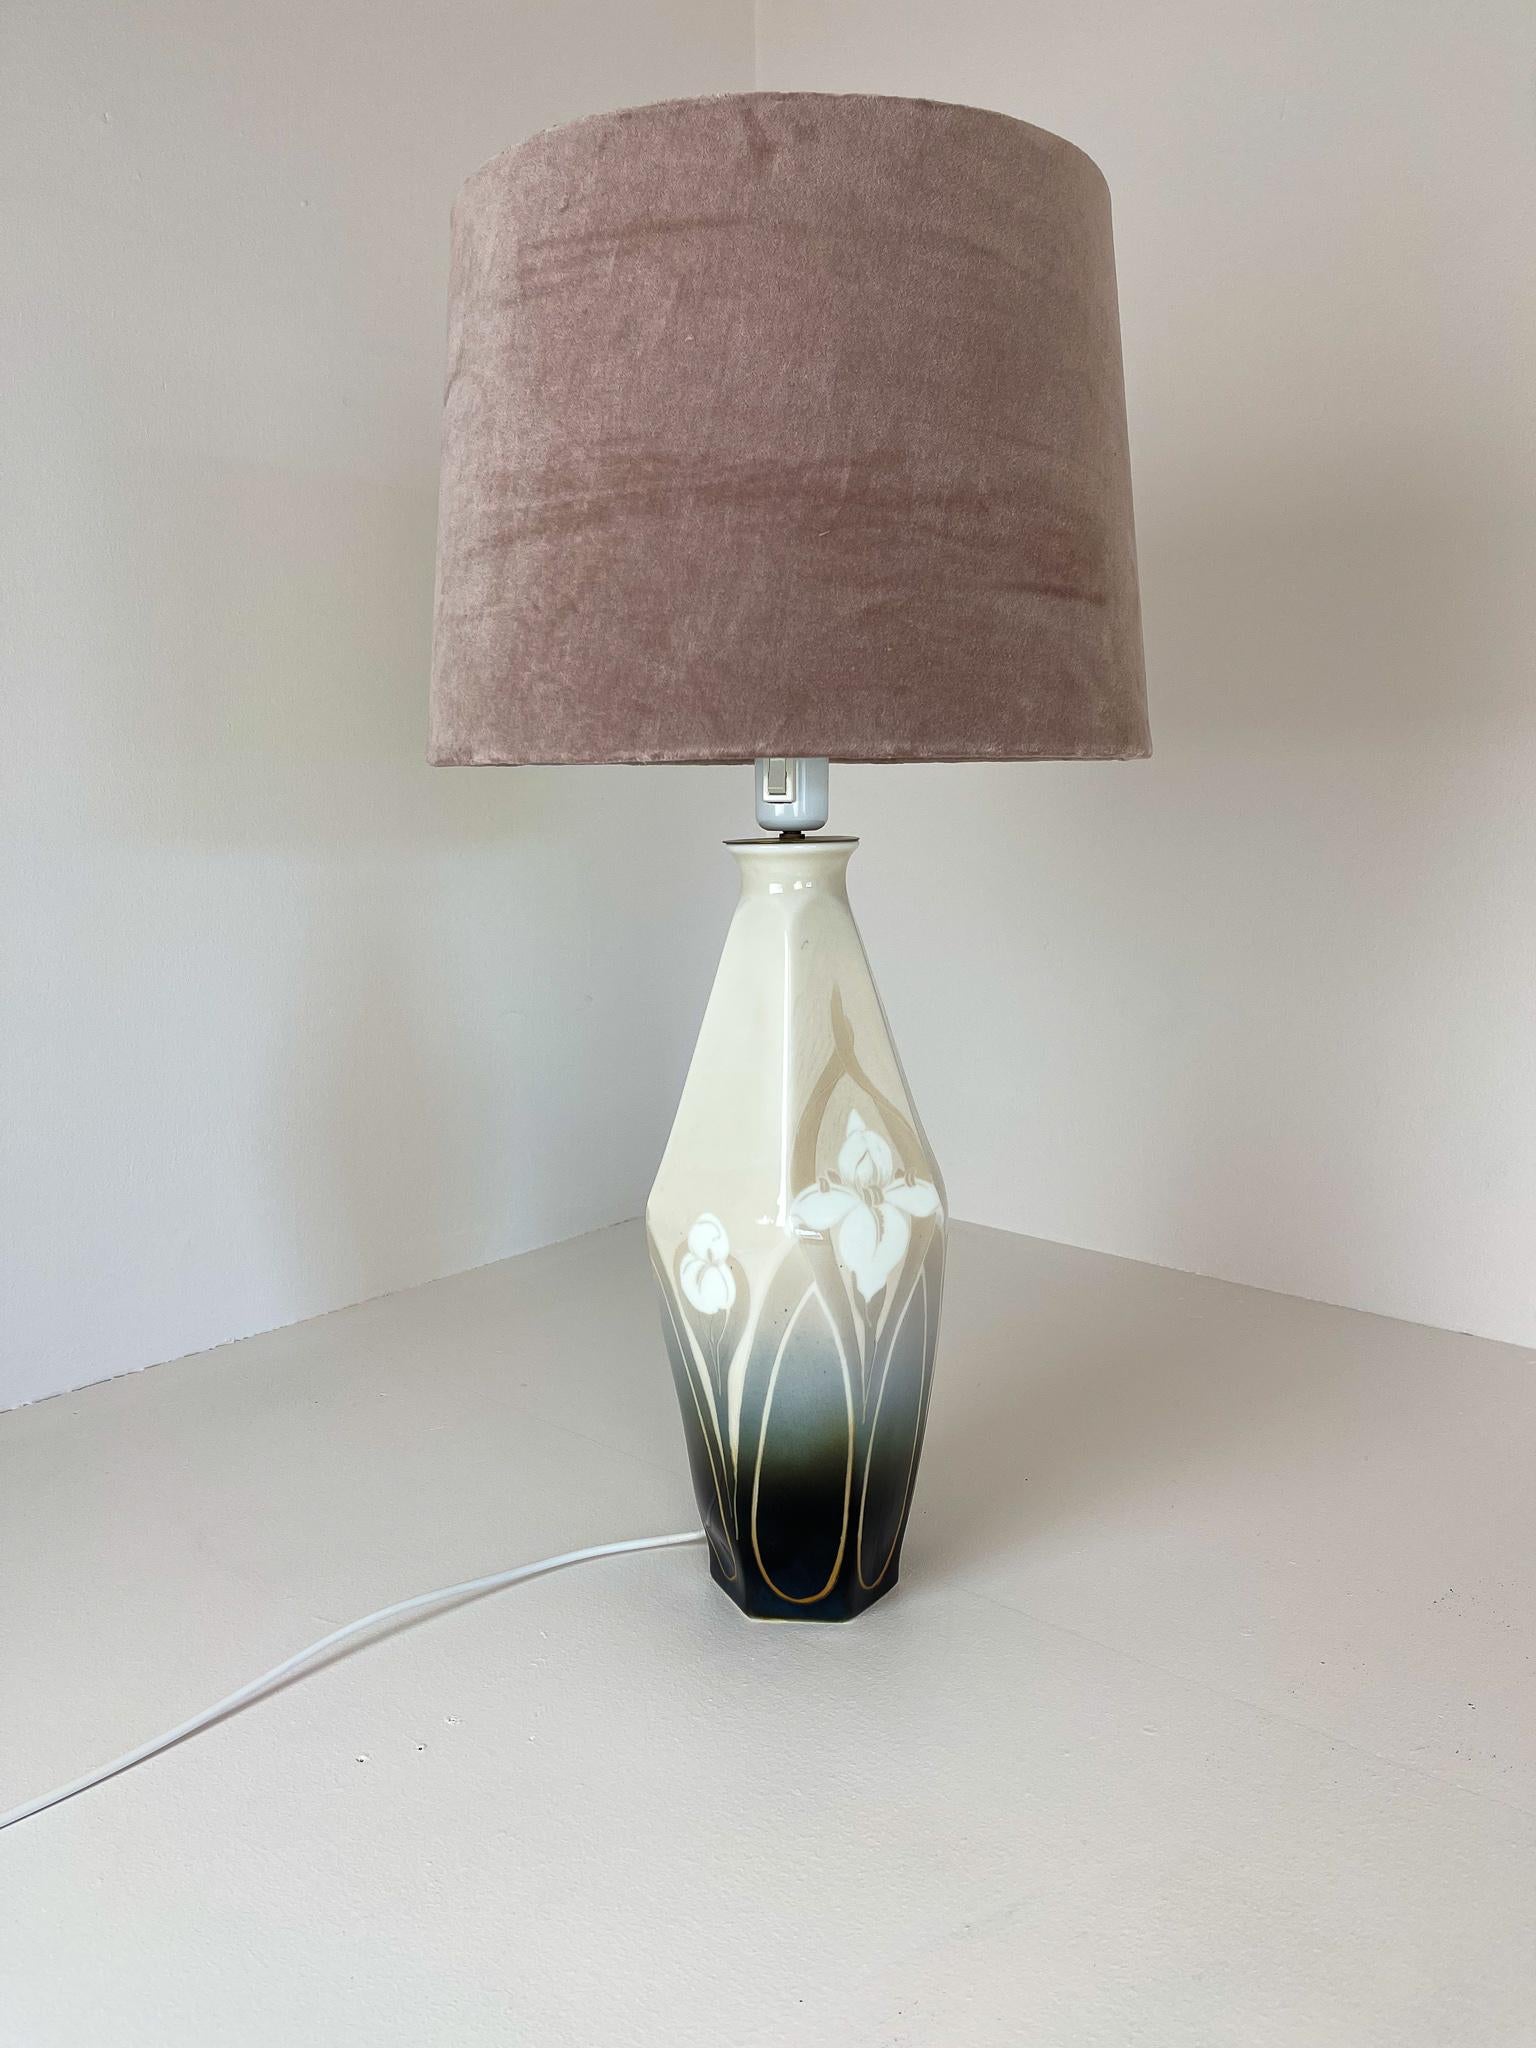 Early 20th Century Art Nouveau Table Lamp Rörstrand Sweden, 1900 For Sale